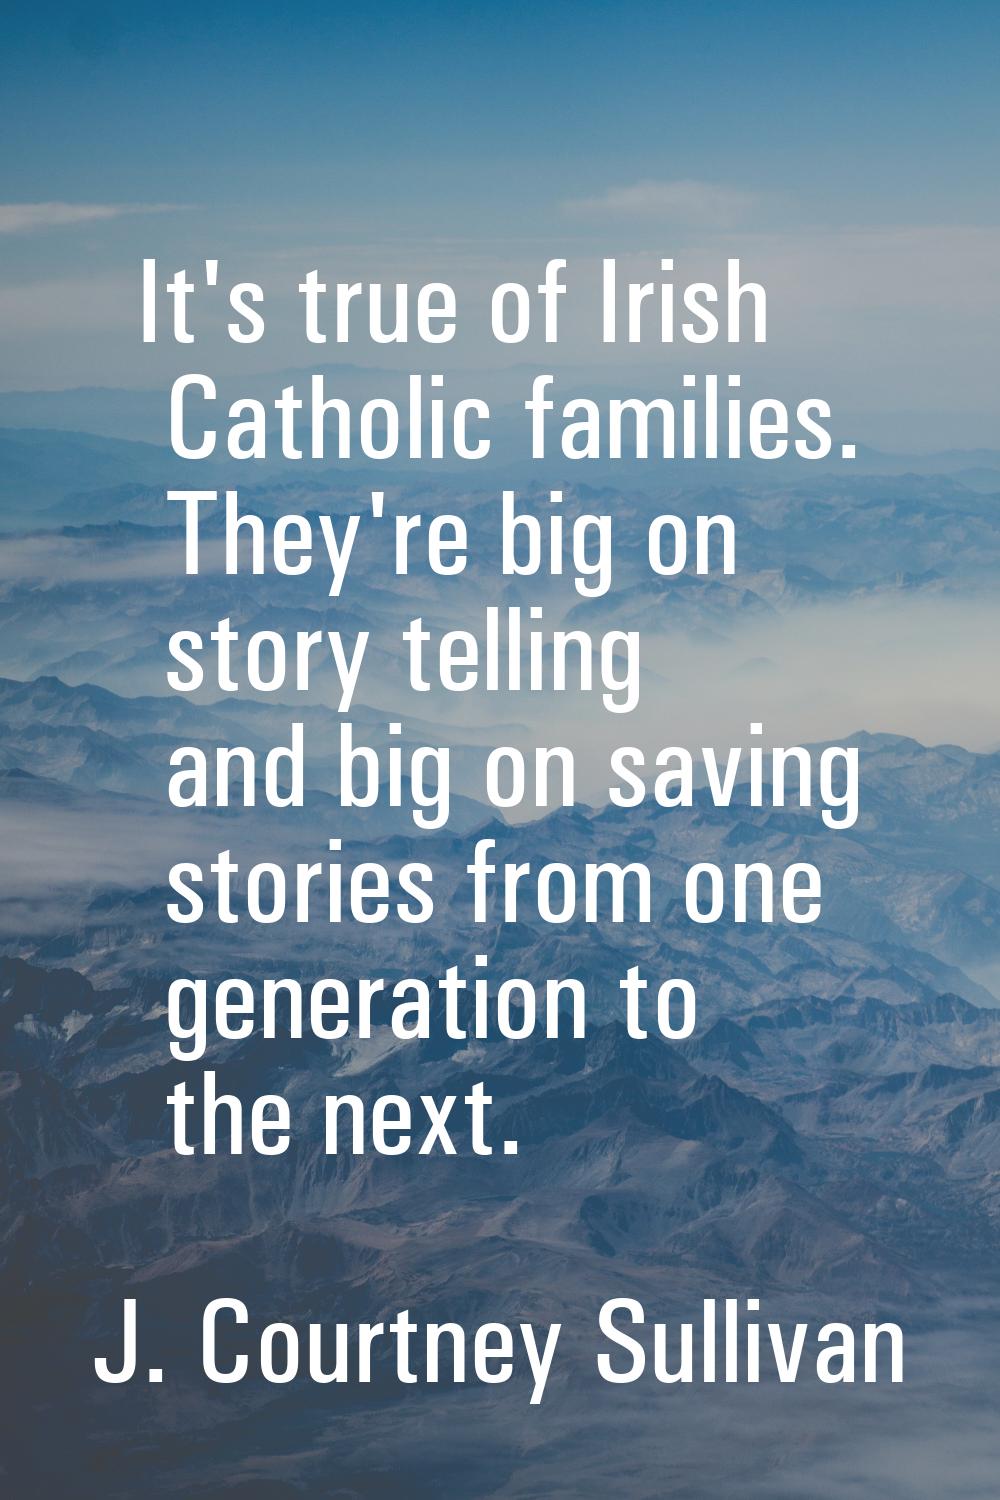 It's true of Irish Catholic families. They're big on story telling and big on saving stories from o